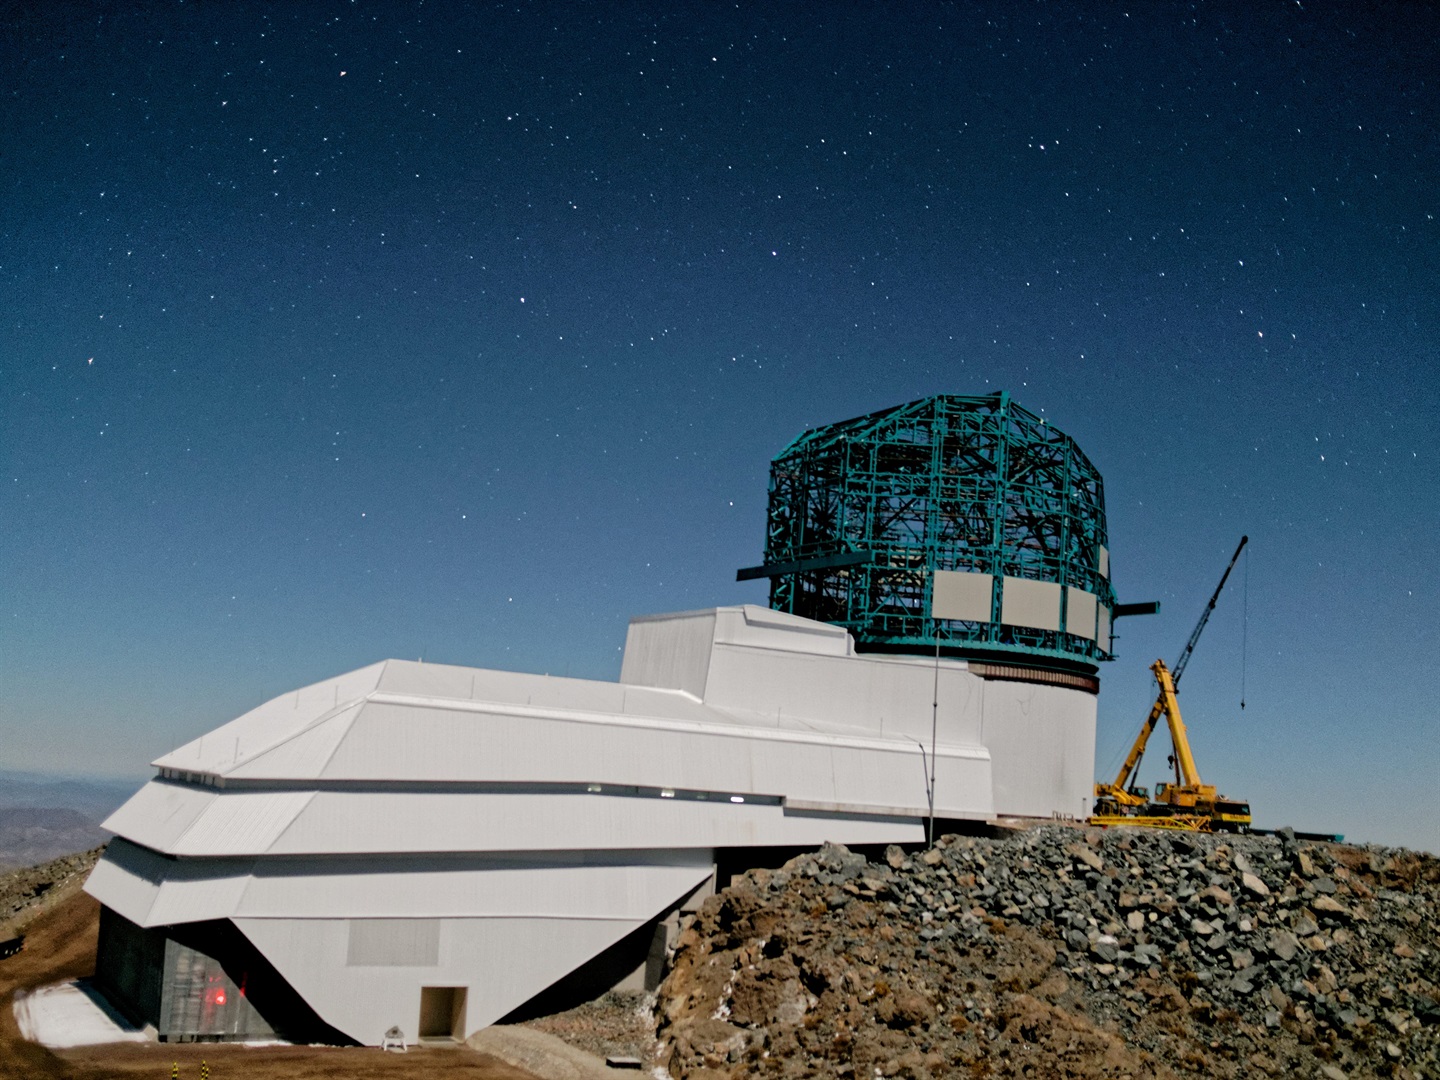 Researchers hope to leverage instruments like Chile's Vera Rubin Observatory, pictured in September 2019, to study unidentified aerial phenomena. Wil O'Mullane/Wikimedia Commons